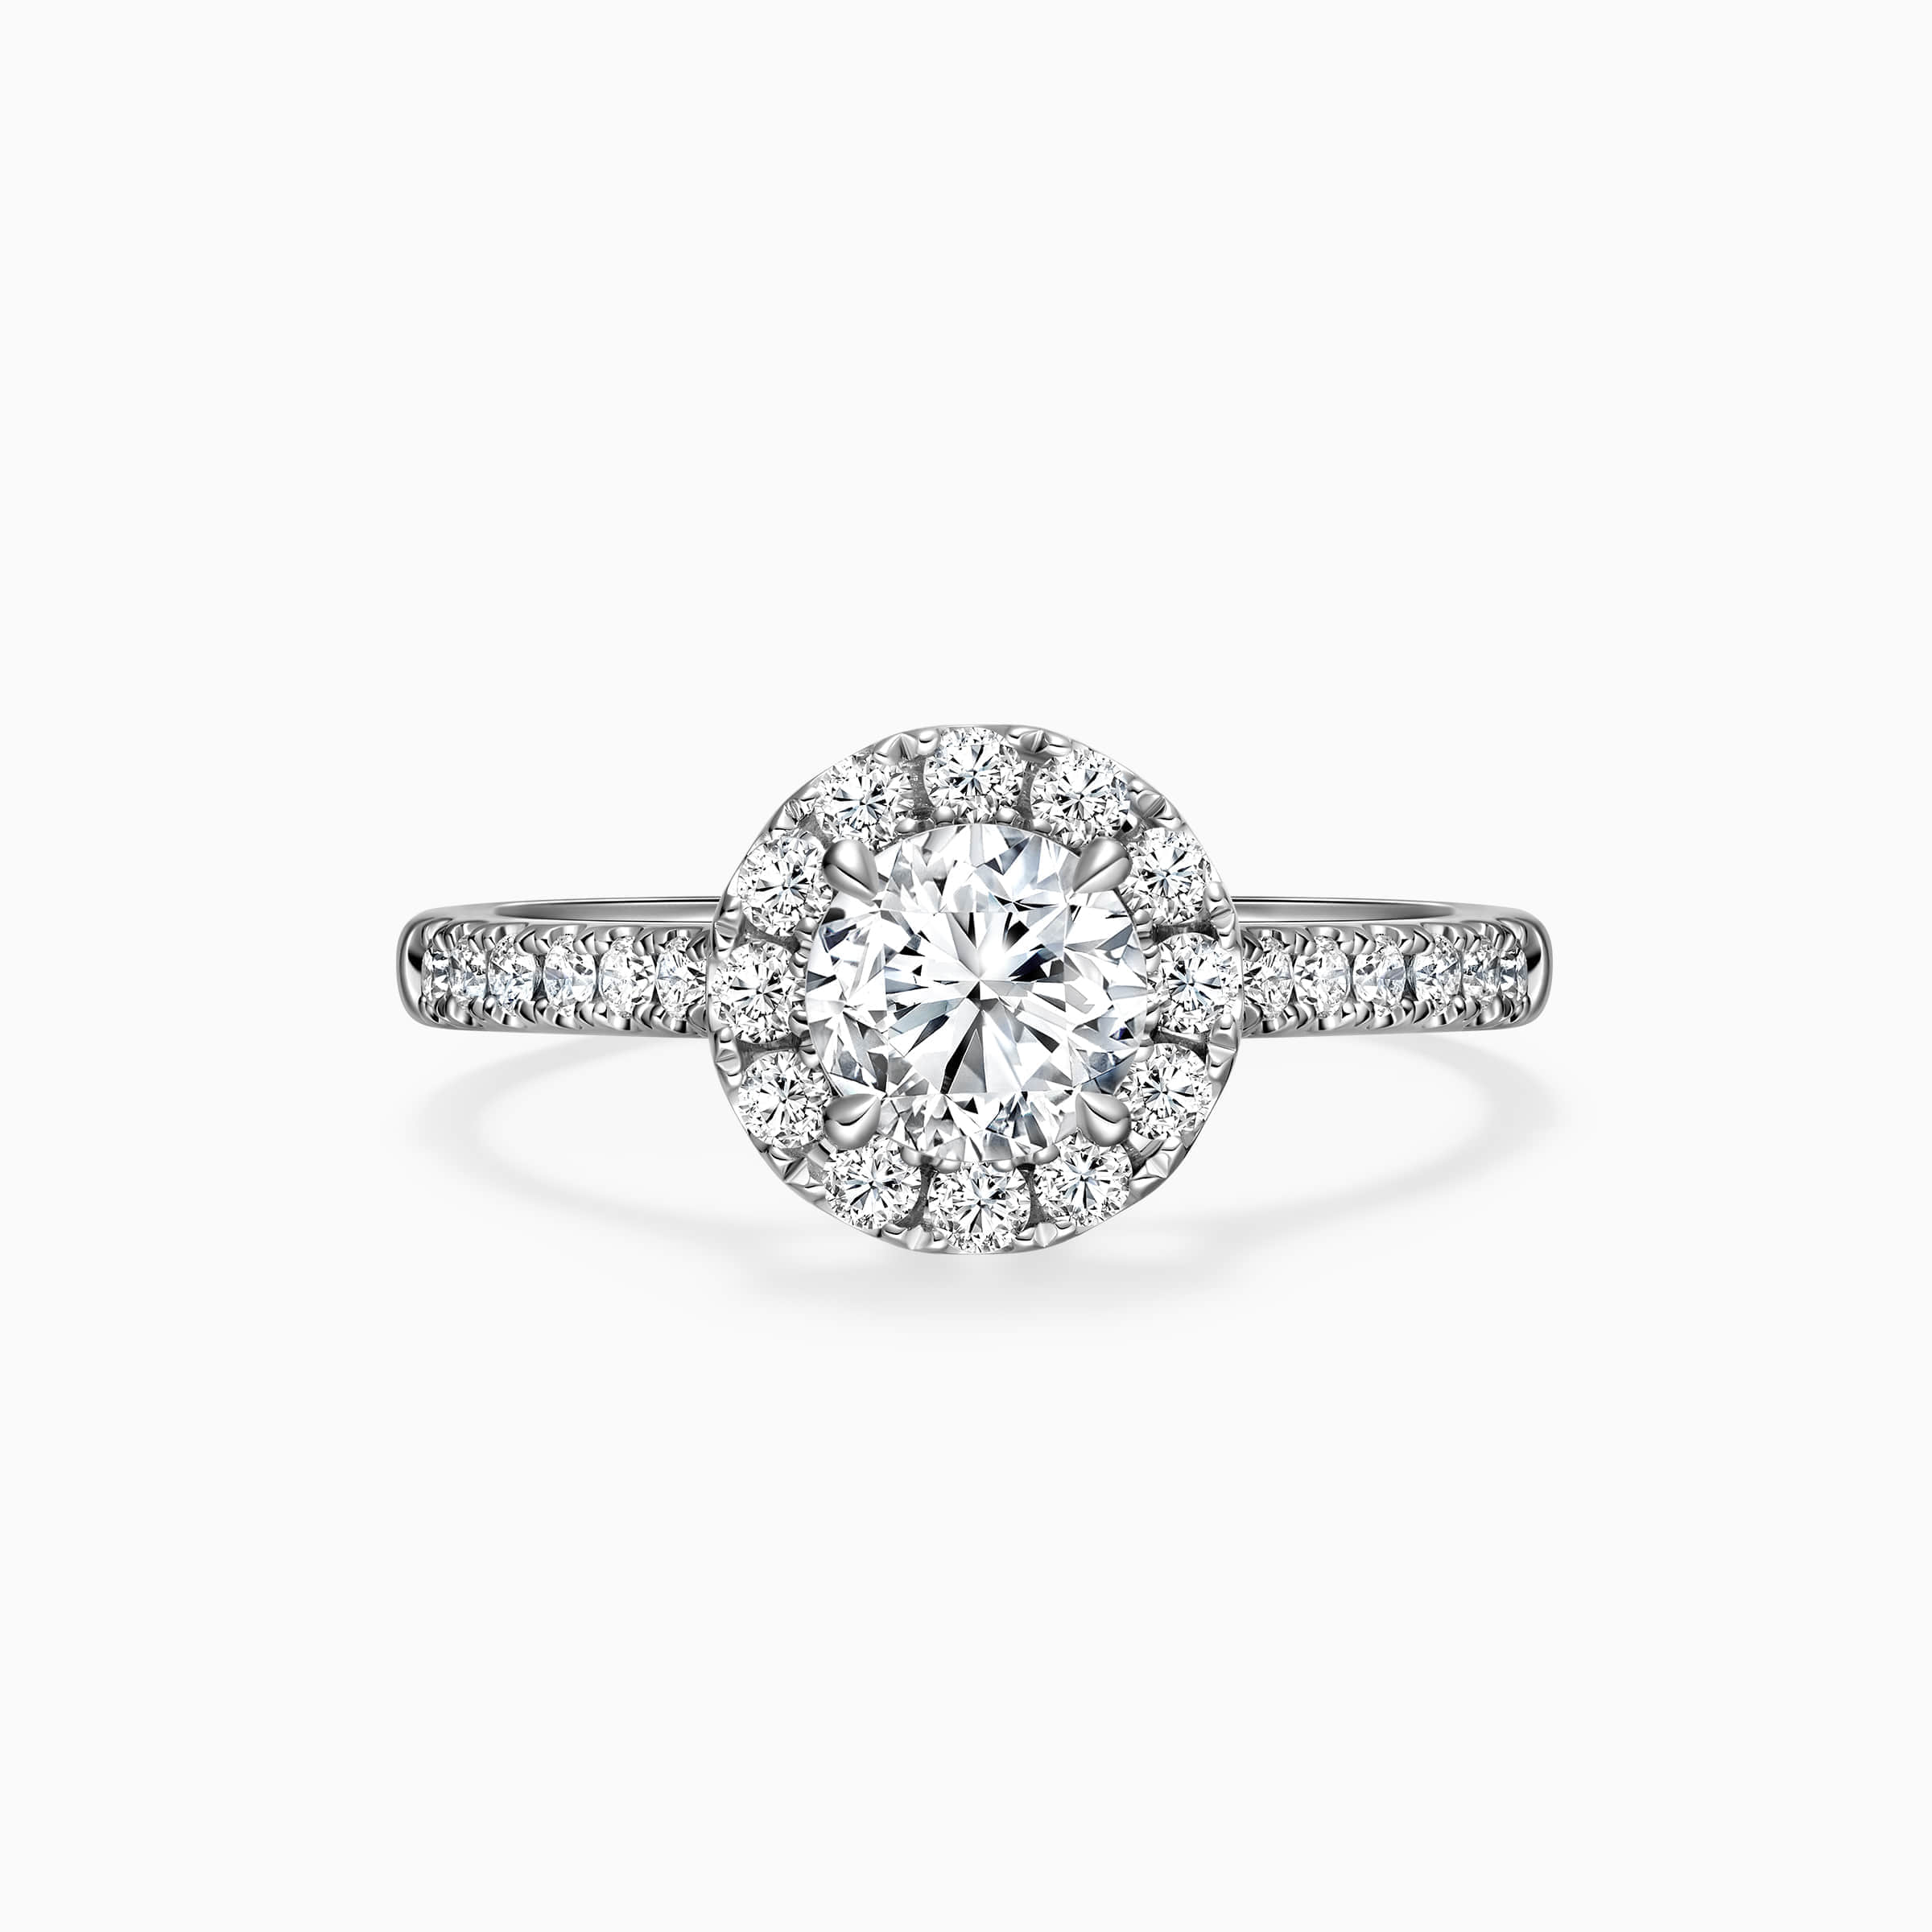 Darry Ring round halo engagement ring front view